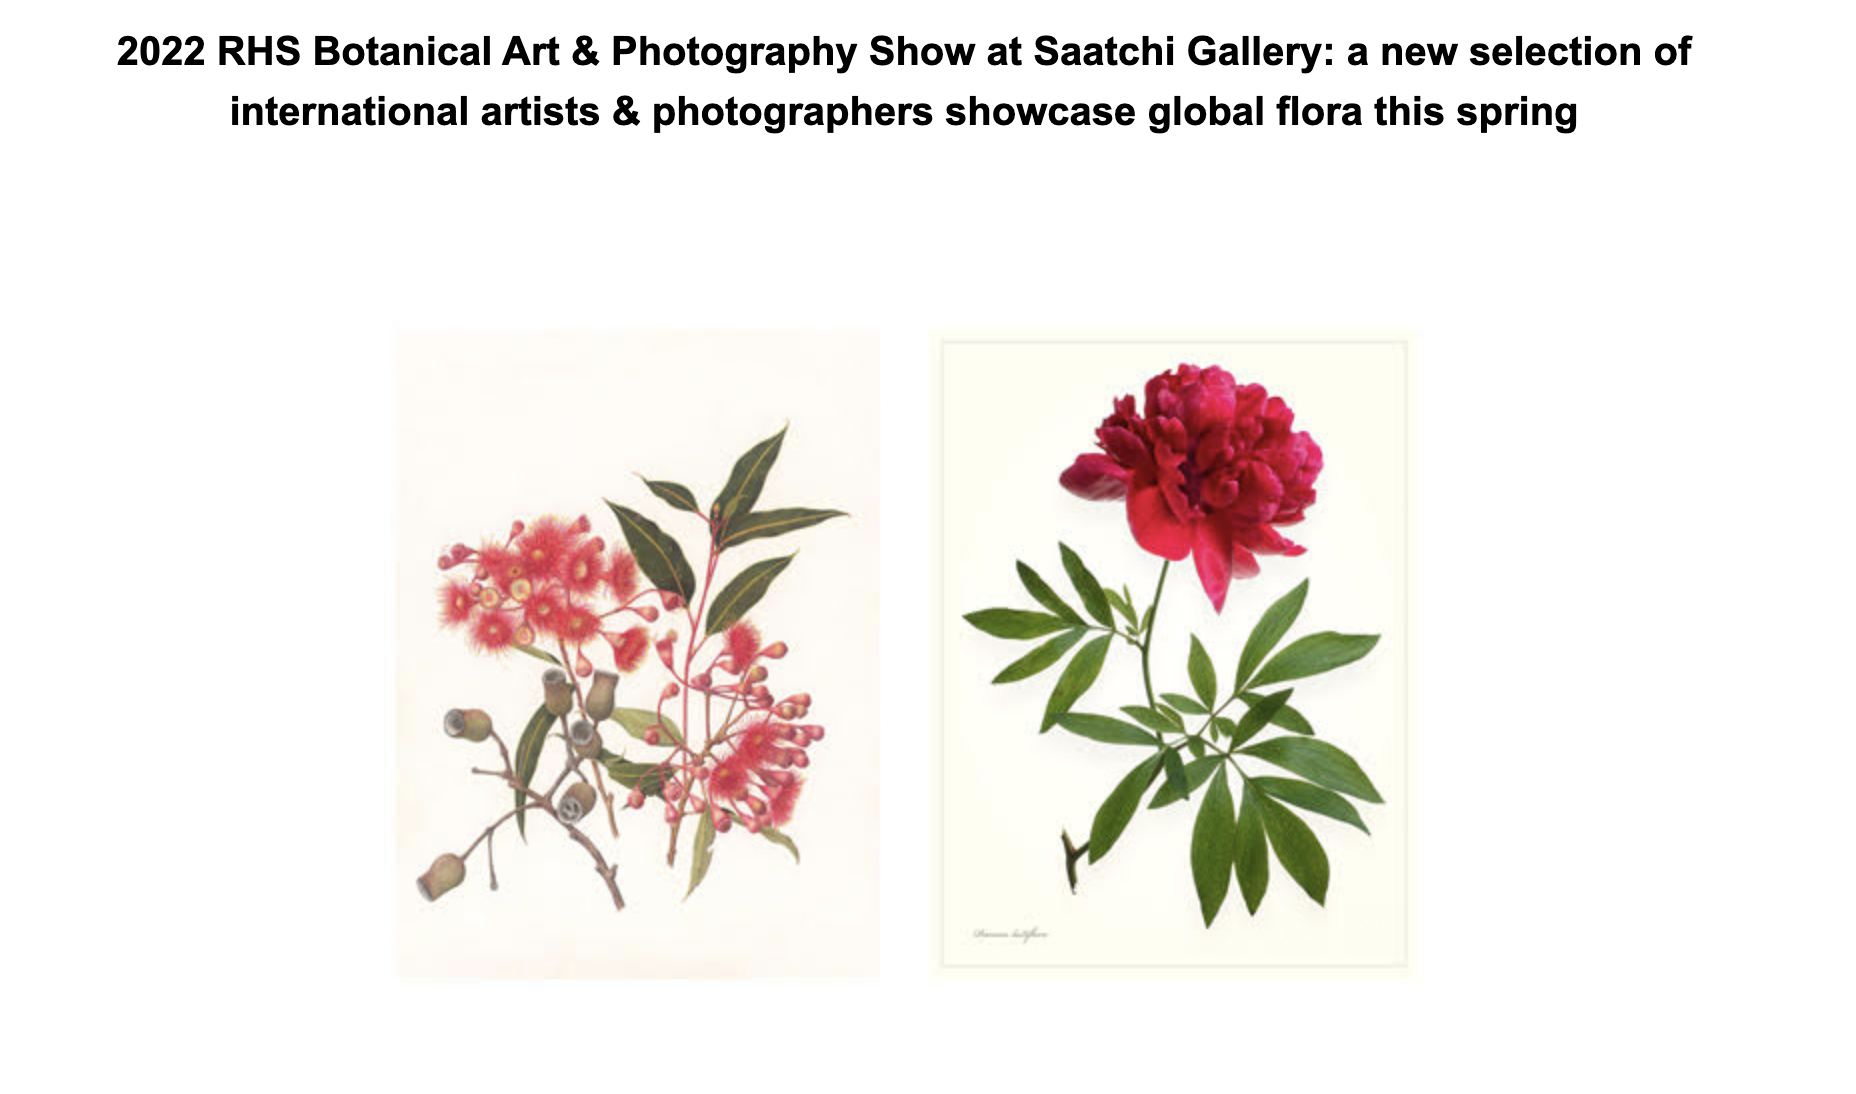 Thumbnail of Exhibition: 2022 RHS Botanical Art & Photography Show at Saatchi Gallery: a new selection of international artists & photographers showcase global flora this spring